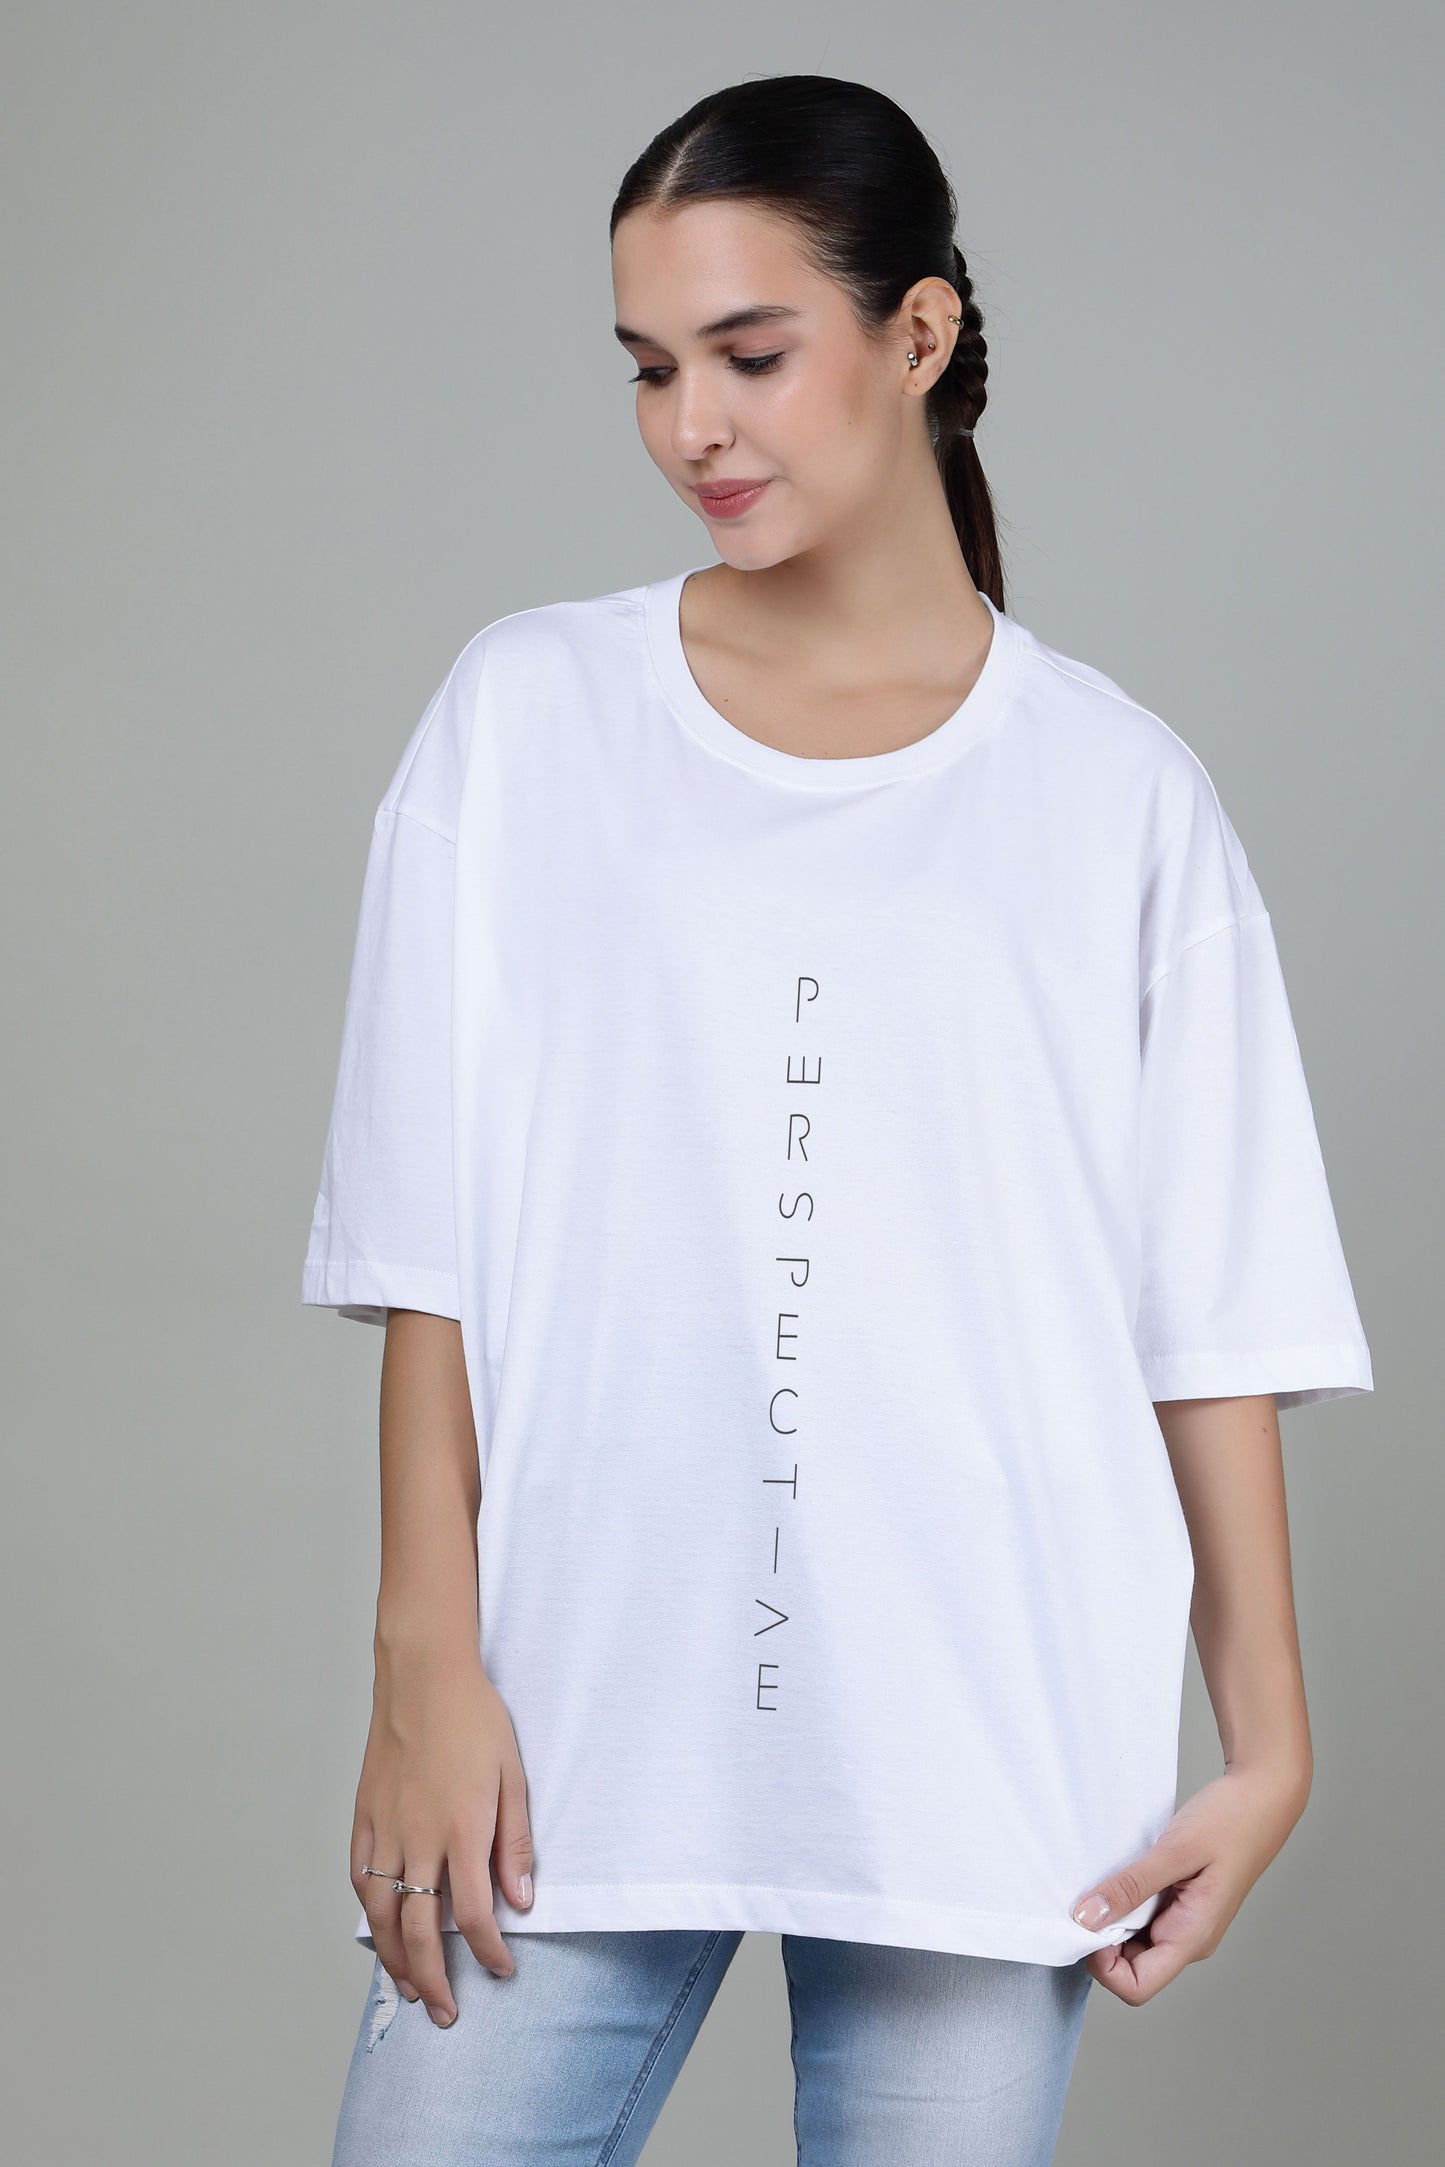 Perspective Radiant White - Printed Oversized Tees